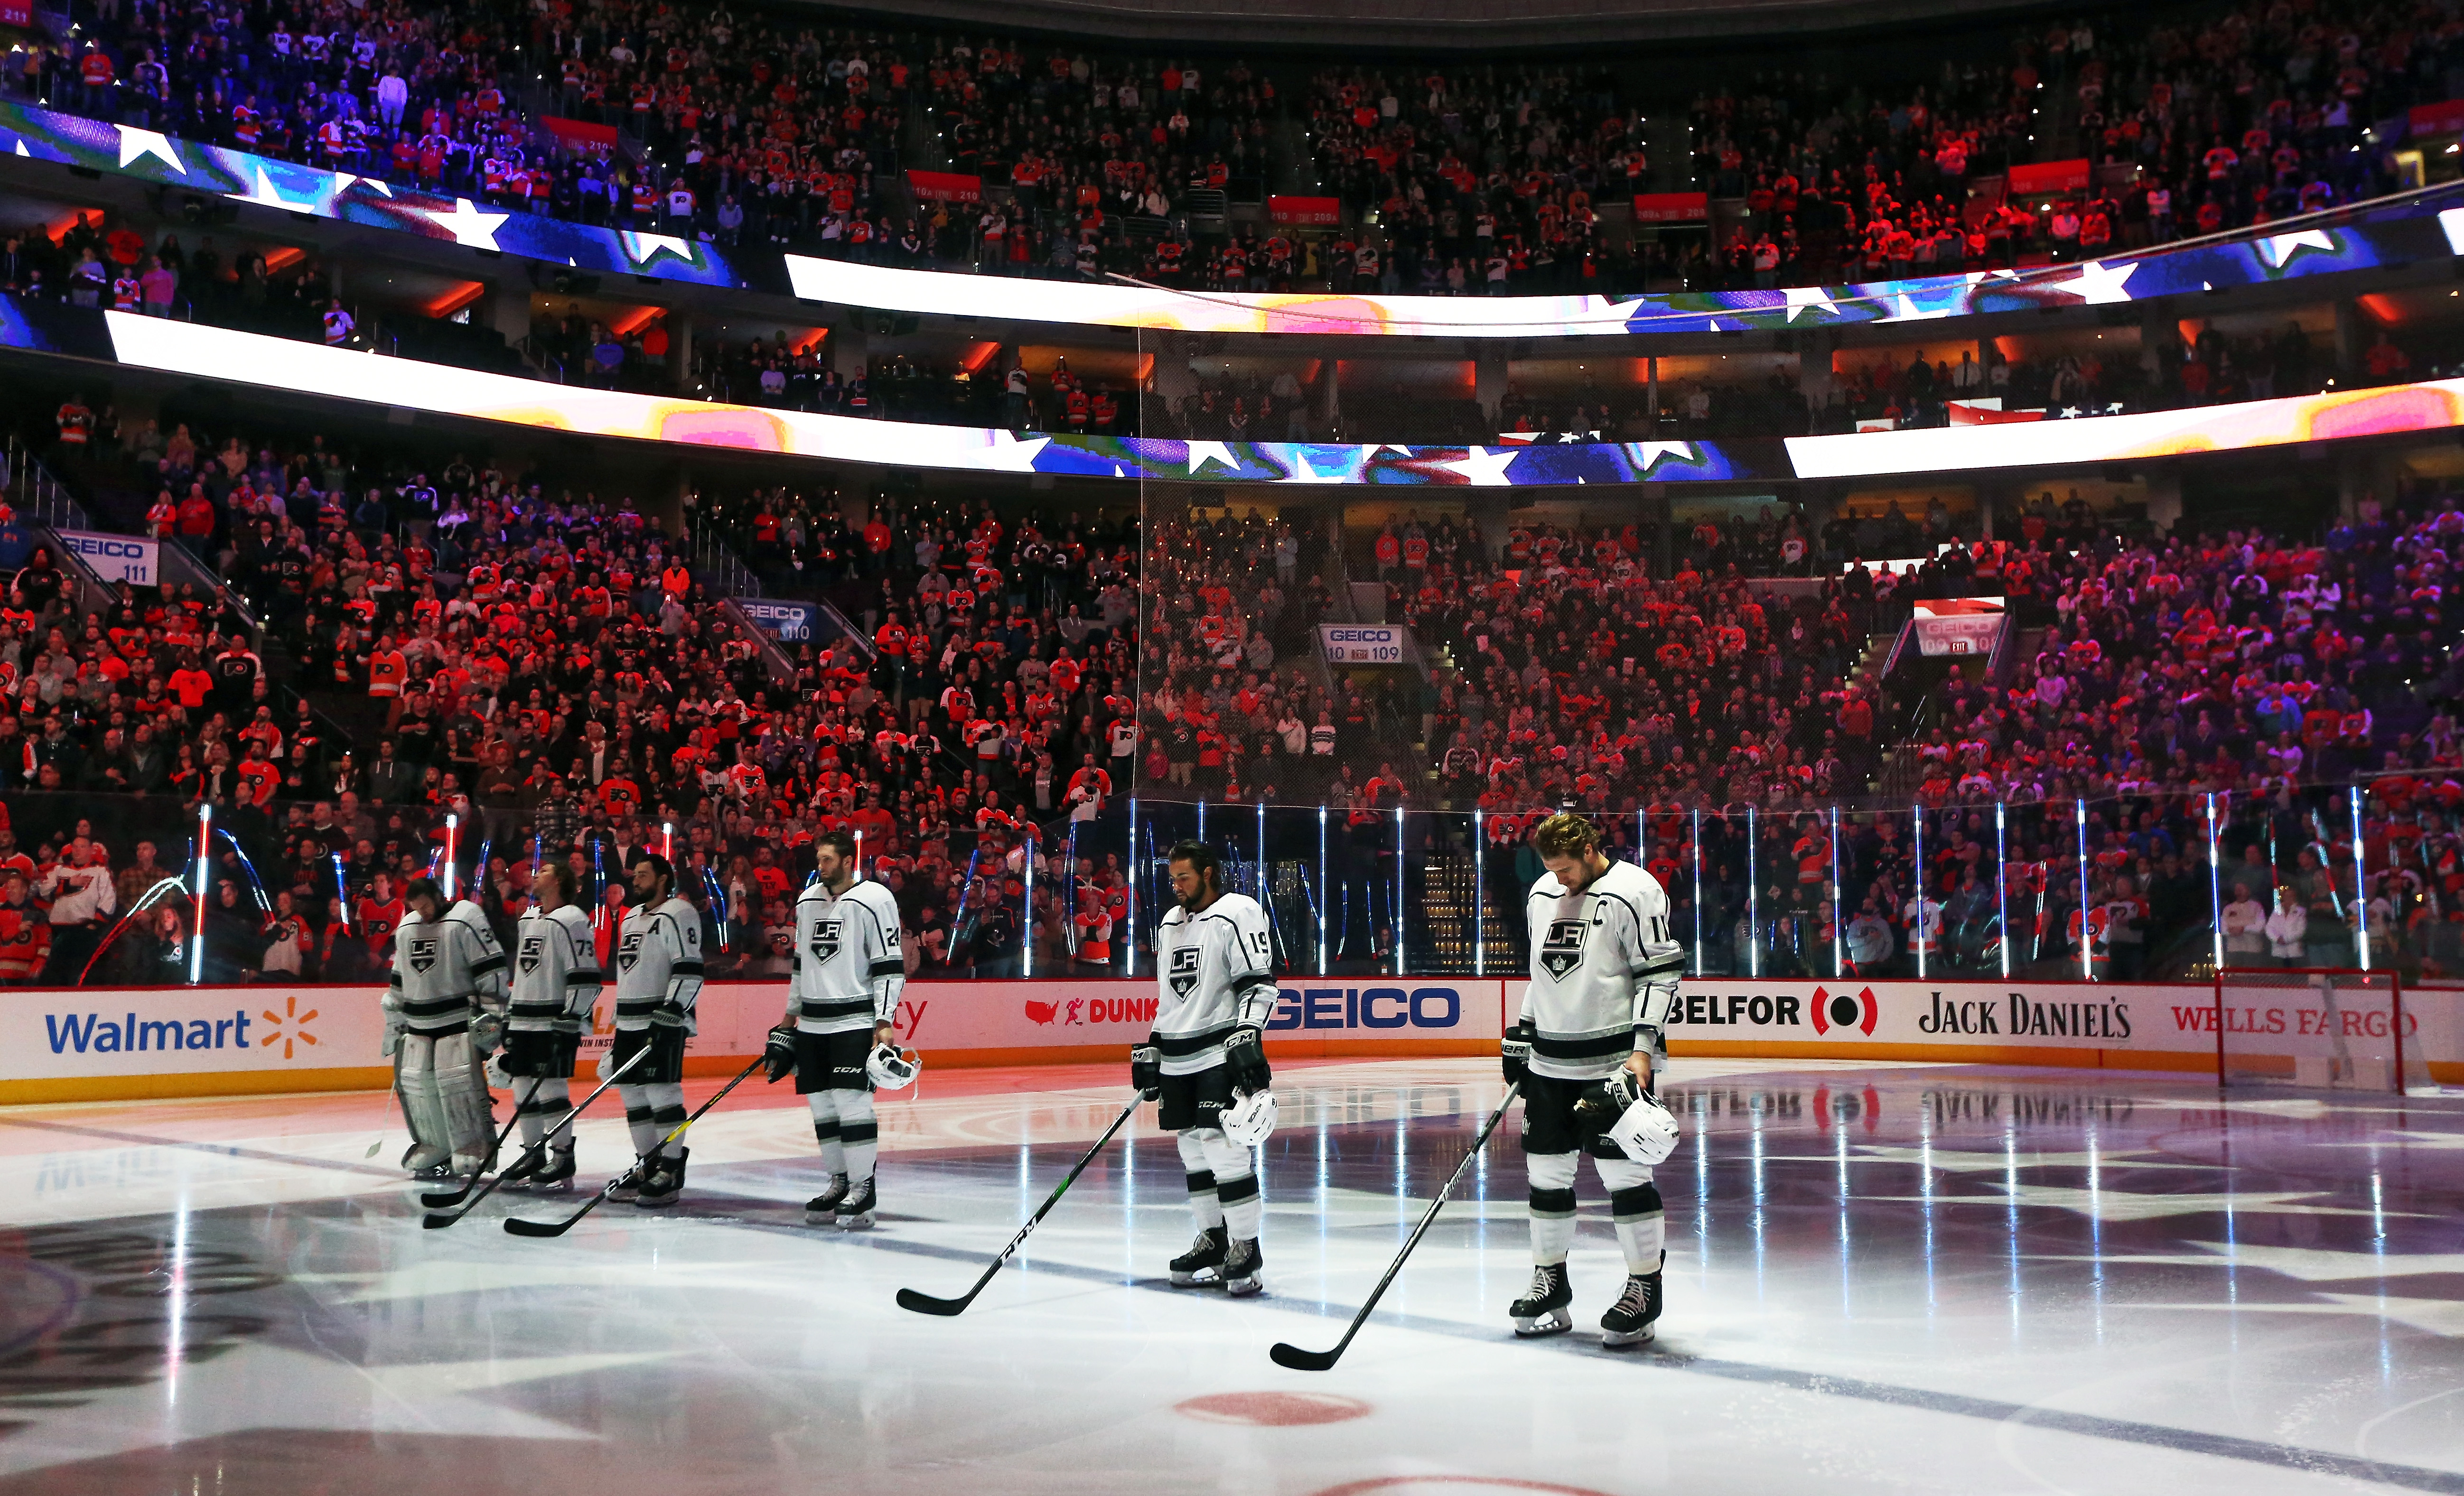 Jack Campbell #36, Tyler Toffoli #73, Drew Doughty #8, Derek Forbort #24, Alex Iafallo #19 and Anze Kopitar #11 of the Los Angeles Kings stand on the blue line during the National Anthem prior to playing the Philadelphia Flyers on January 18, 2020 at the Wells Fargo Center in Philadelphia, Pennsylvania.  